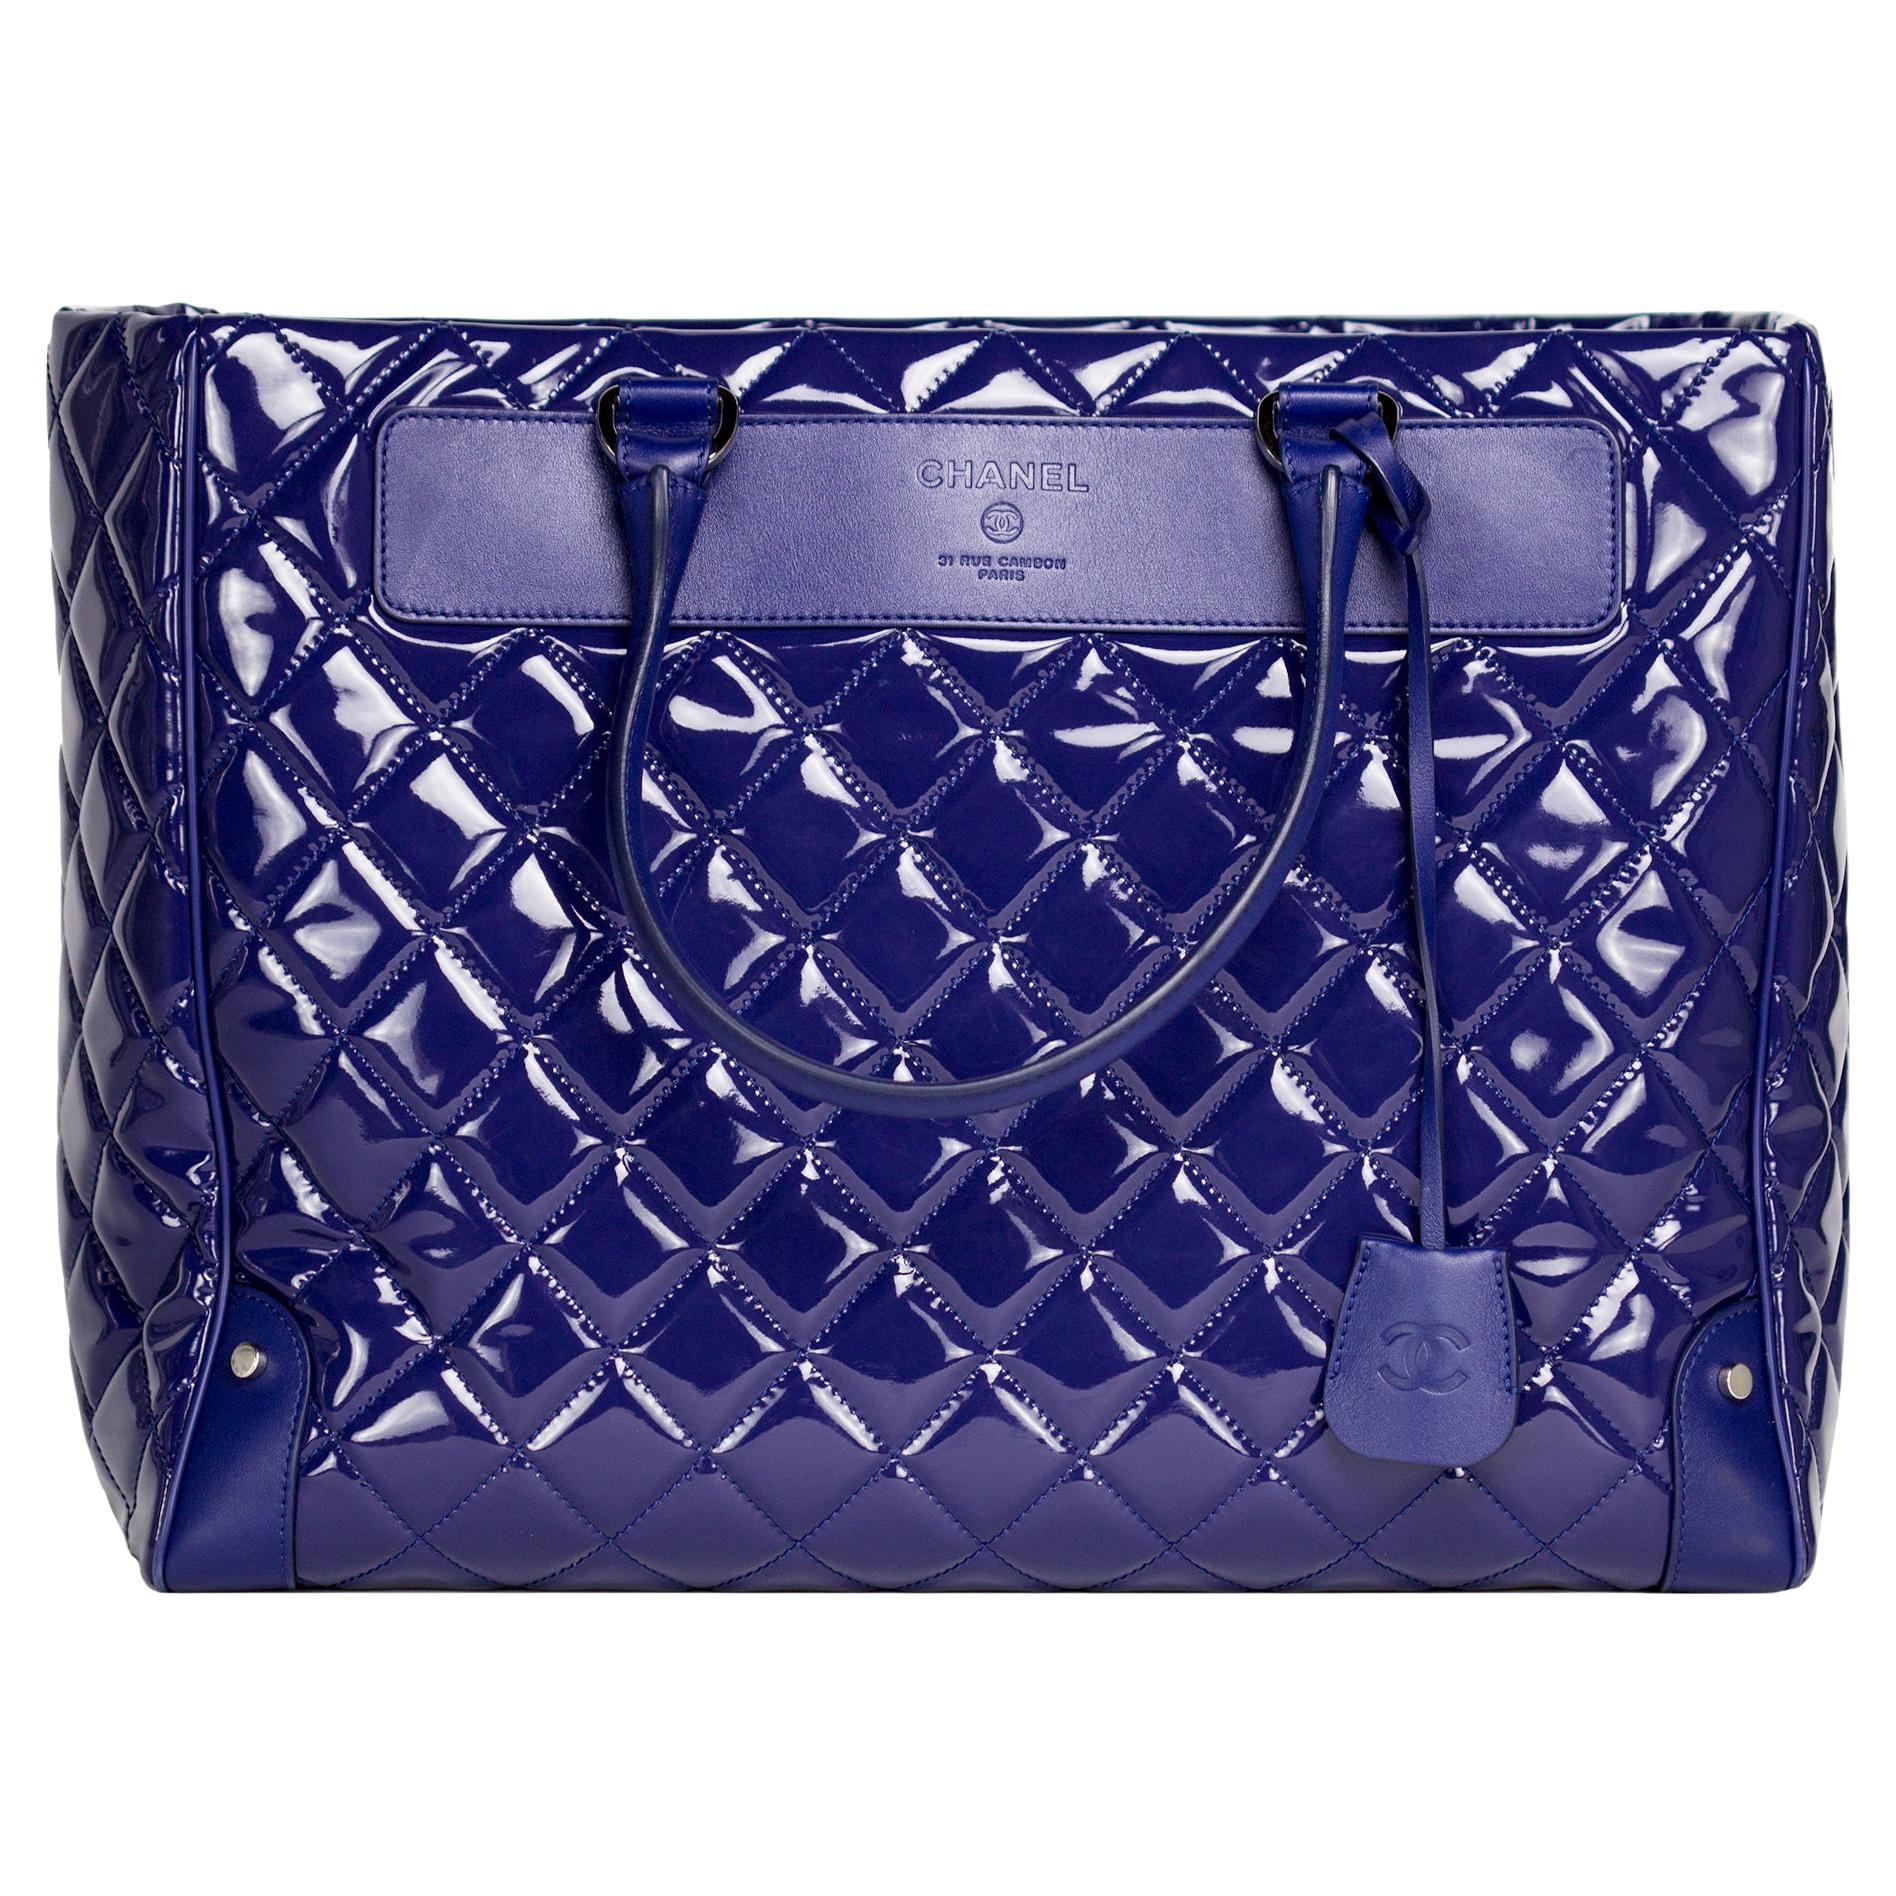 Chanel Timeless XL Quilted Carry-on Tote Royal Blue Patent Leather Bag